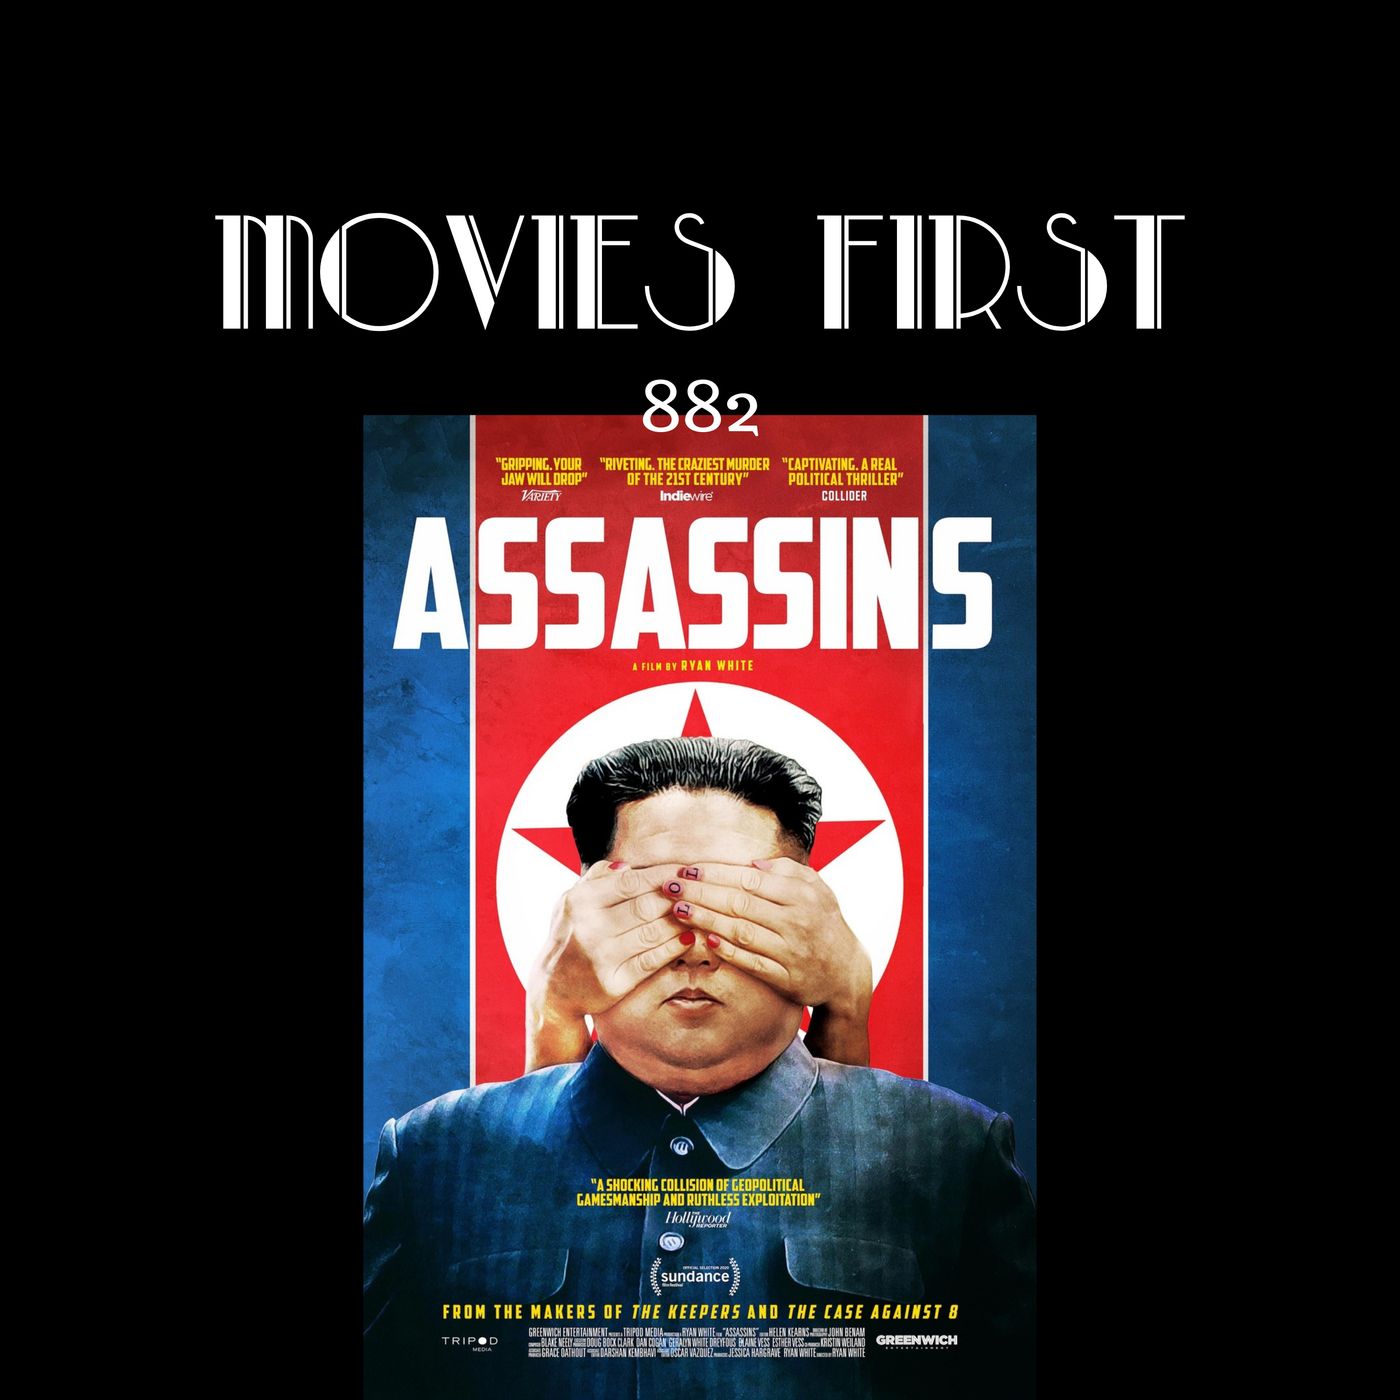 Assassins (Documentary) (the @MoviesFirst review)